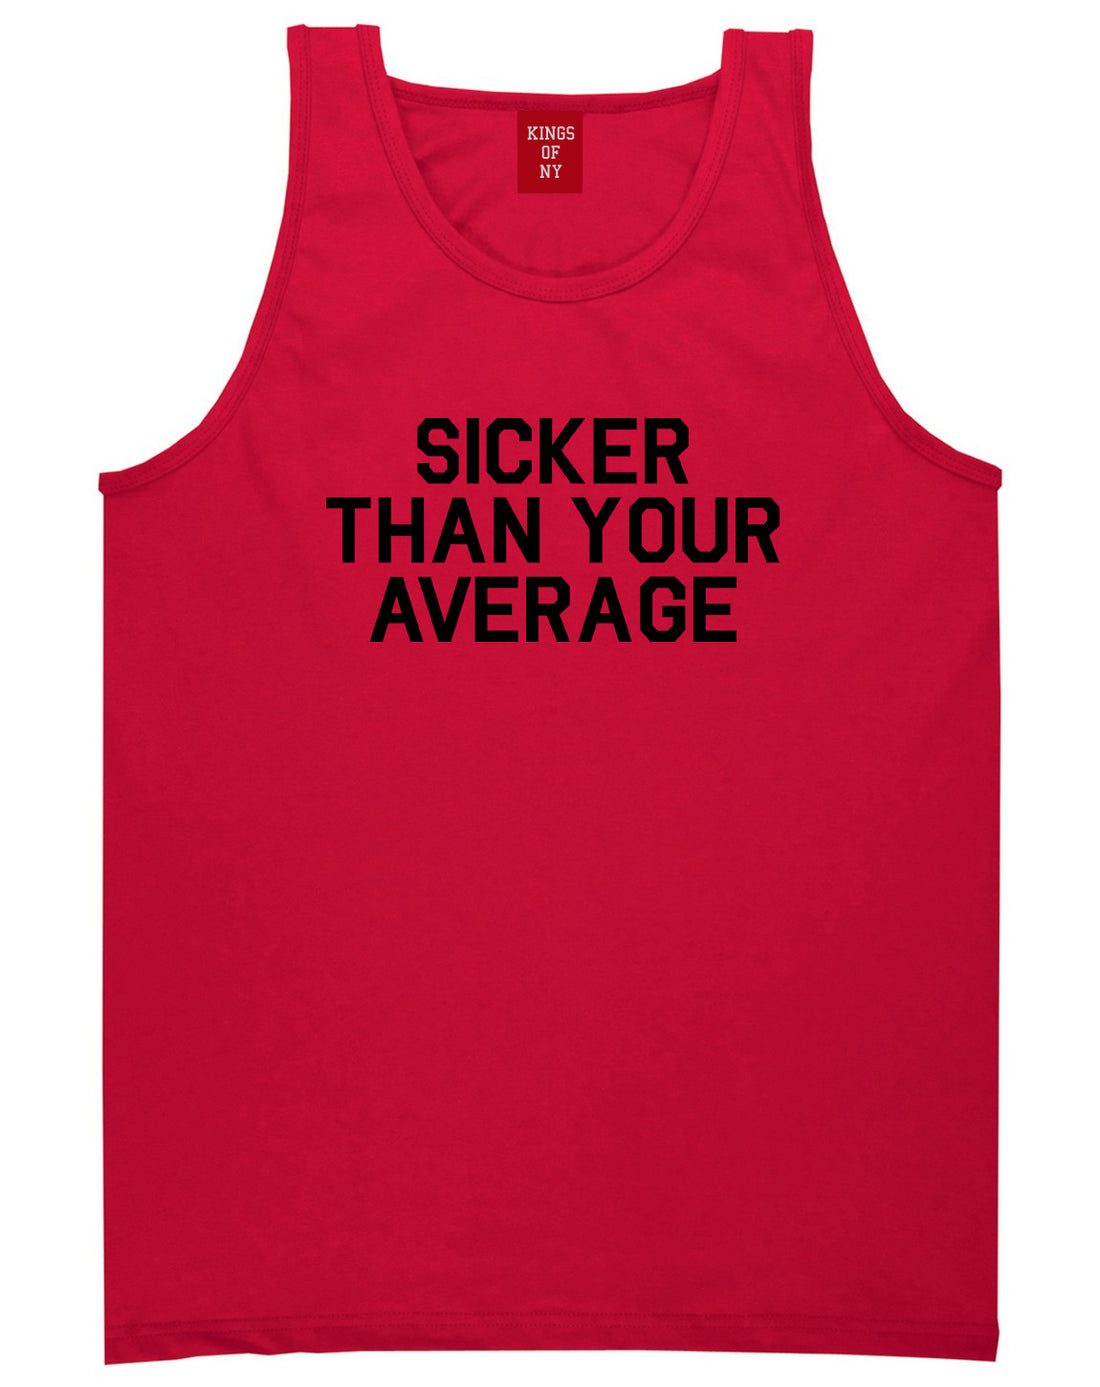 Sicker Than Your Average Tank Top Shirt in Red